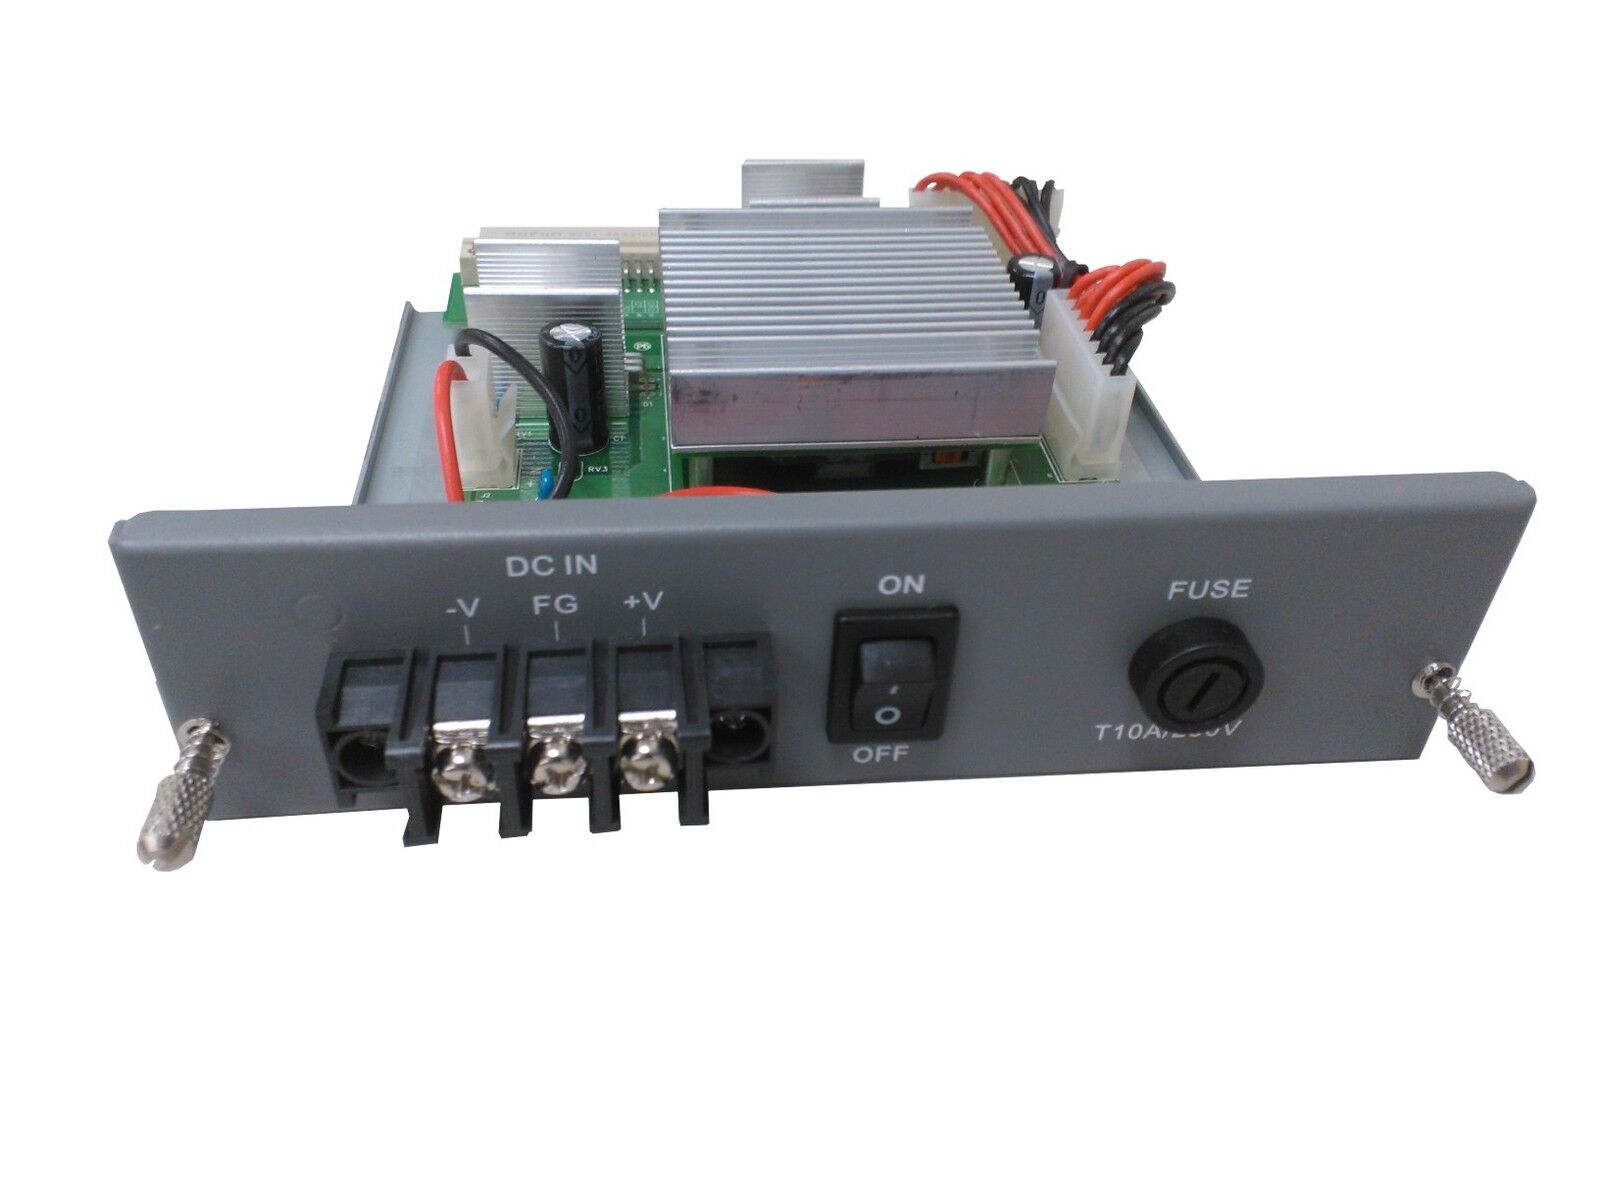 FRM220-DC48 redundant neg DC48V power supply for FRM220-CH20 chassis